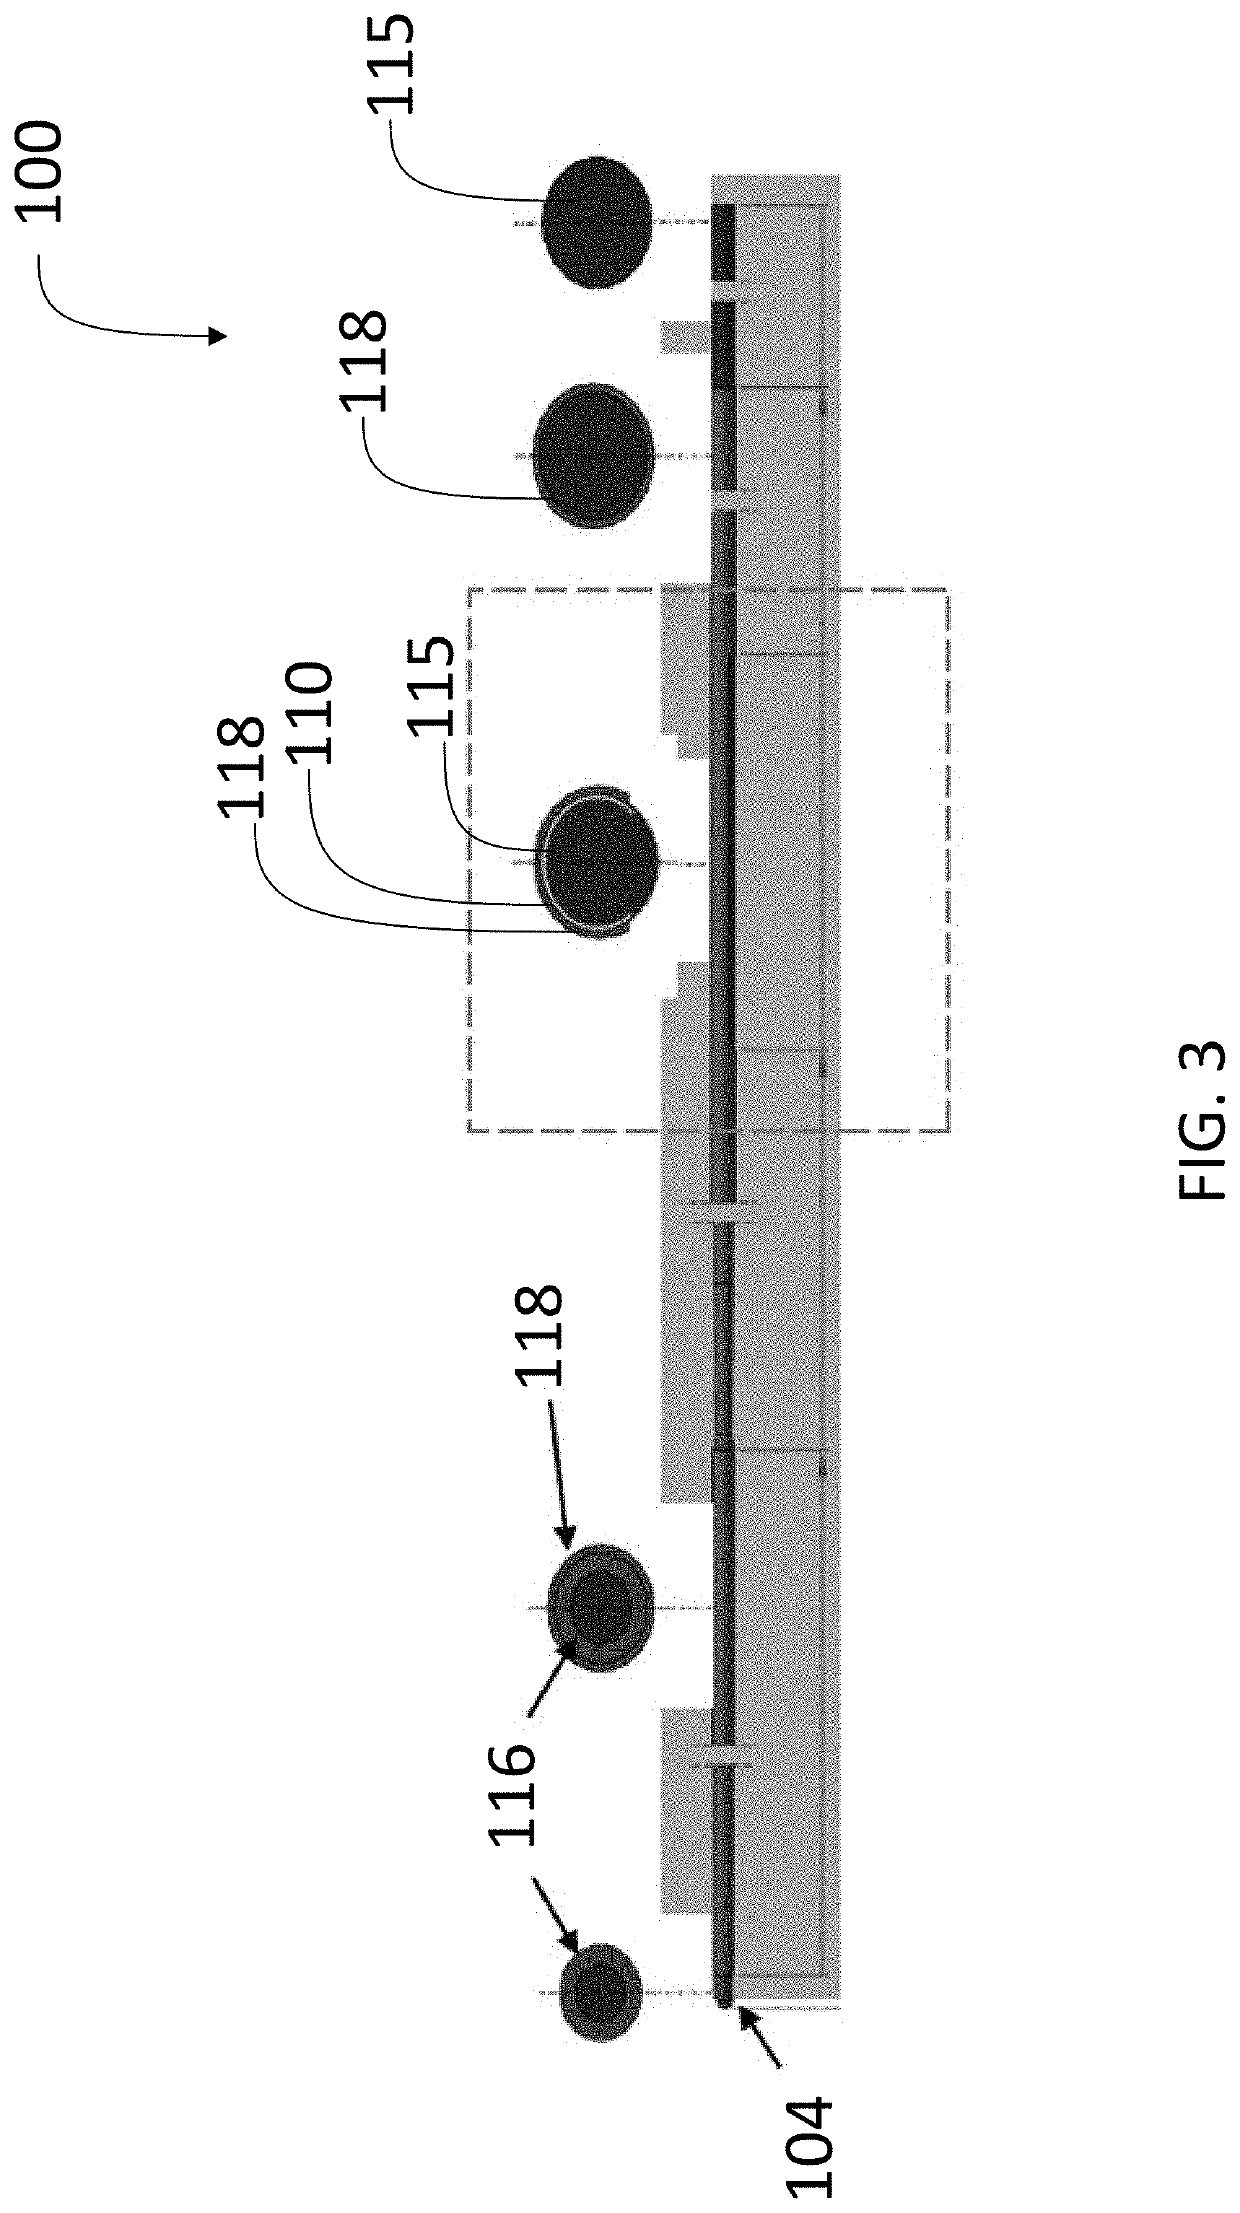 Tissue cutting systems and methods